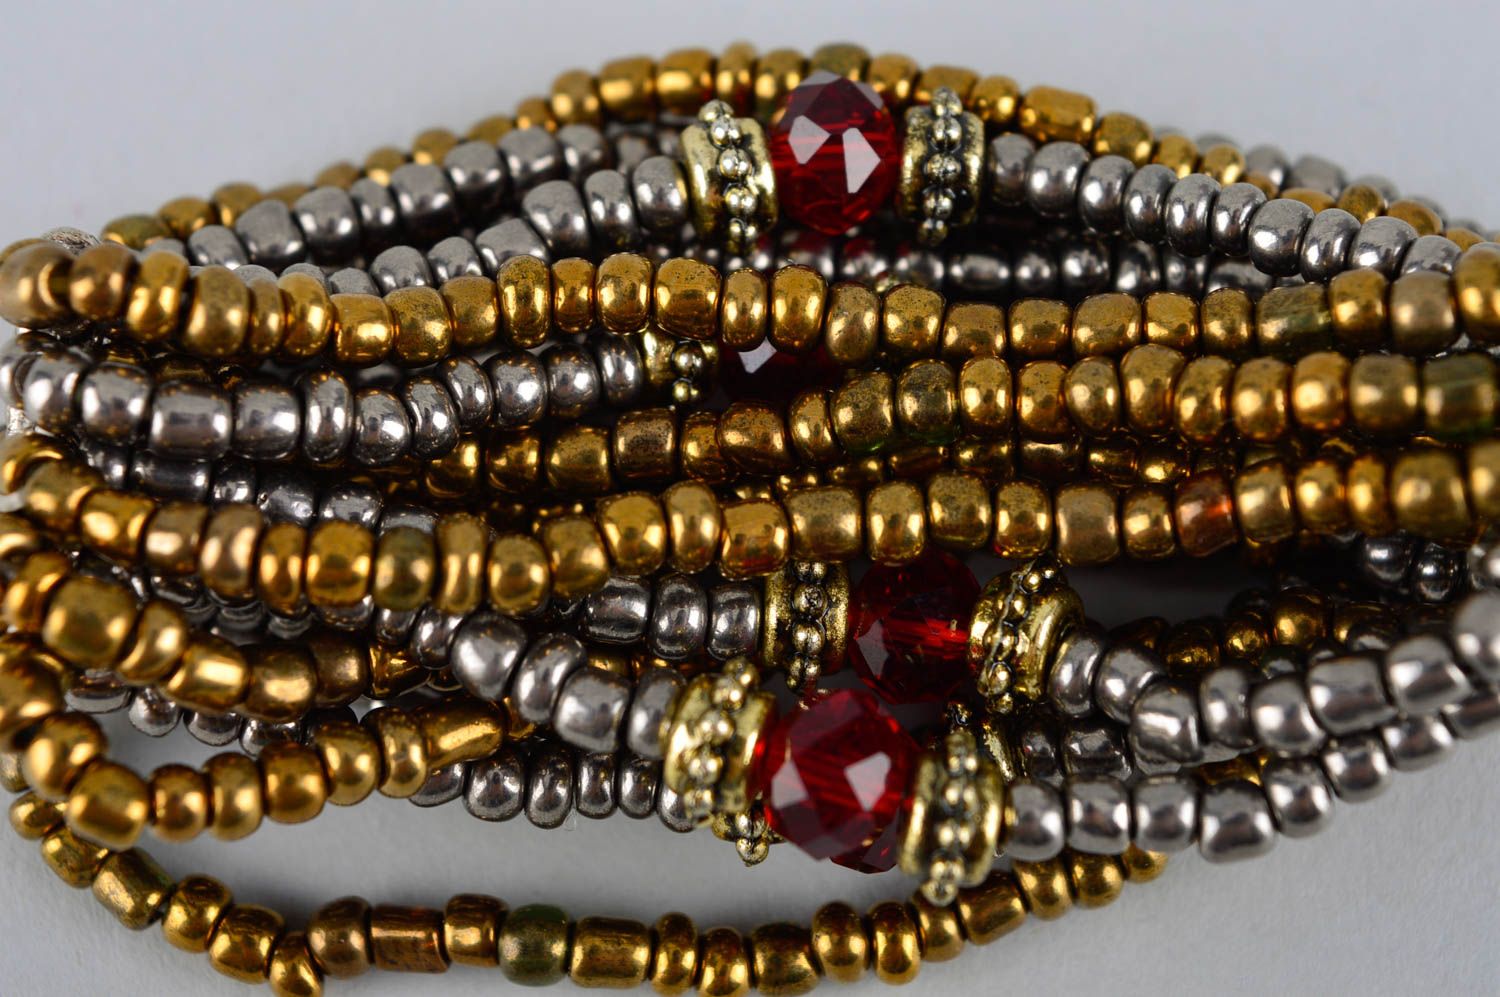 Multi-row wrist line bracelet made of silver and gold color beads for women photo 5